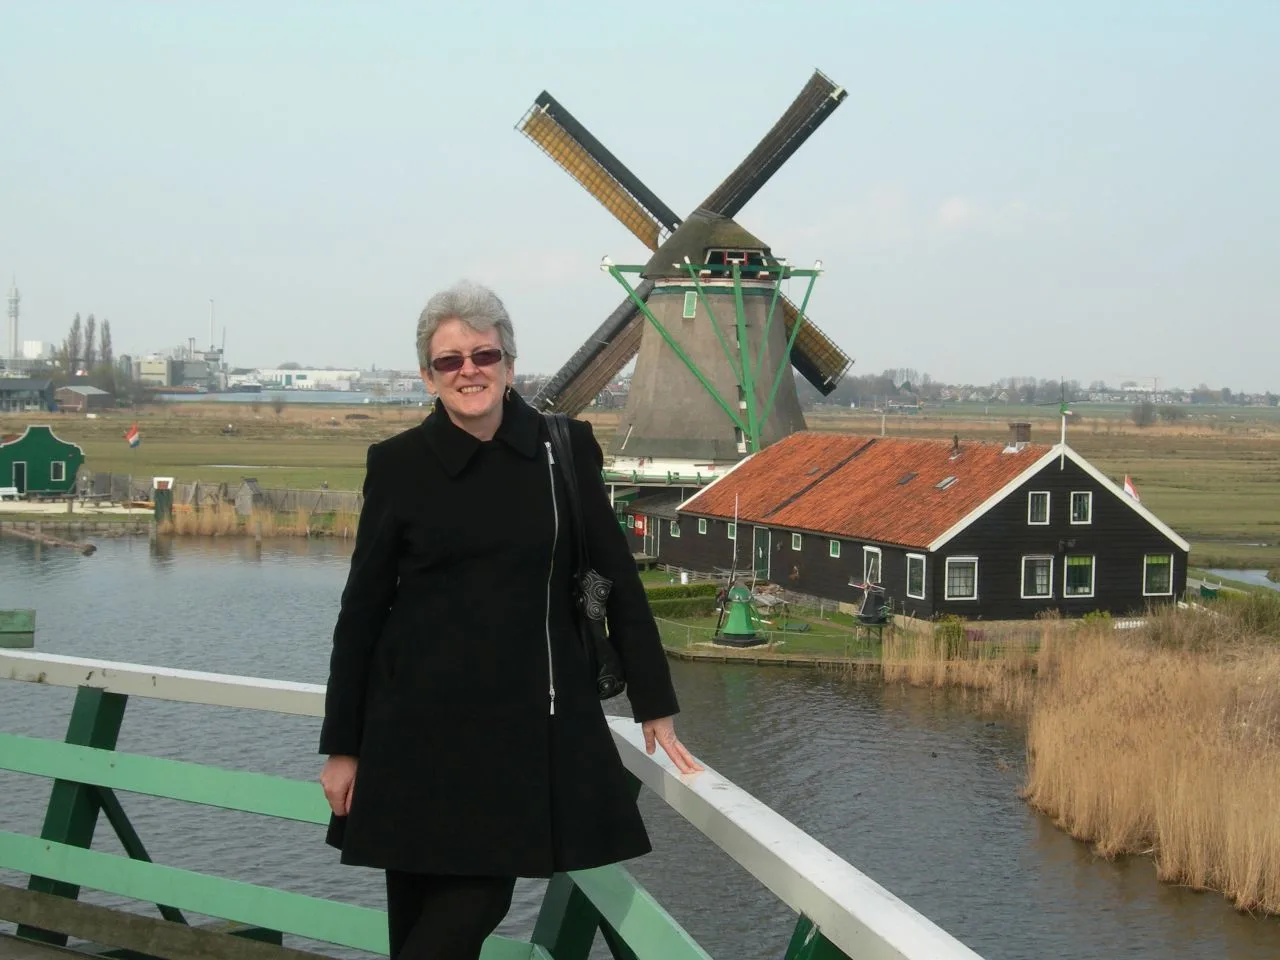 Anabel in the Netherlands.